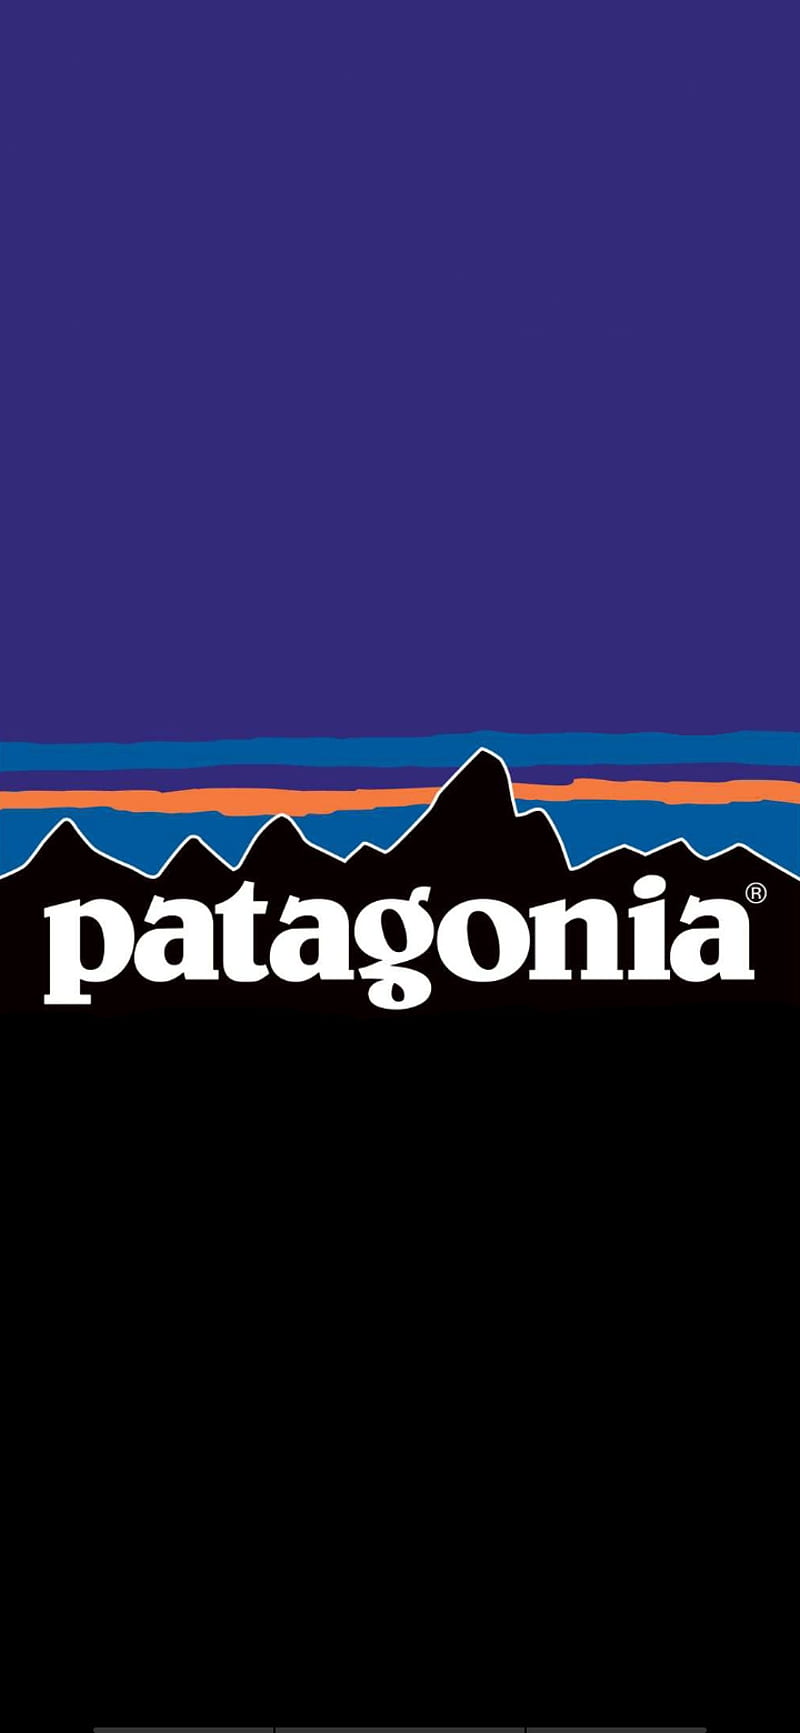 Share more than 69 patagonia wallpaper best - in.cdgdbentre